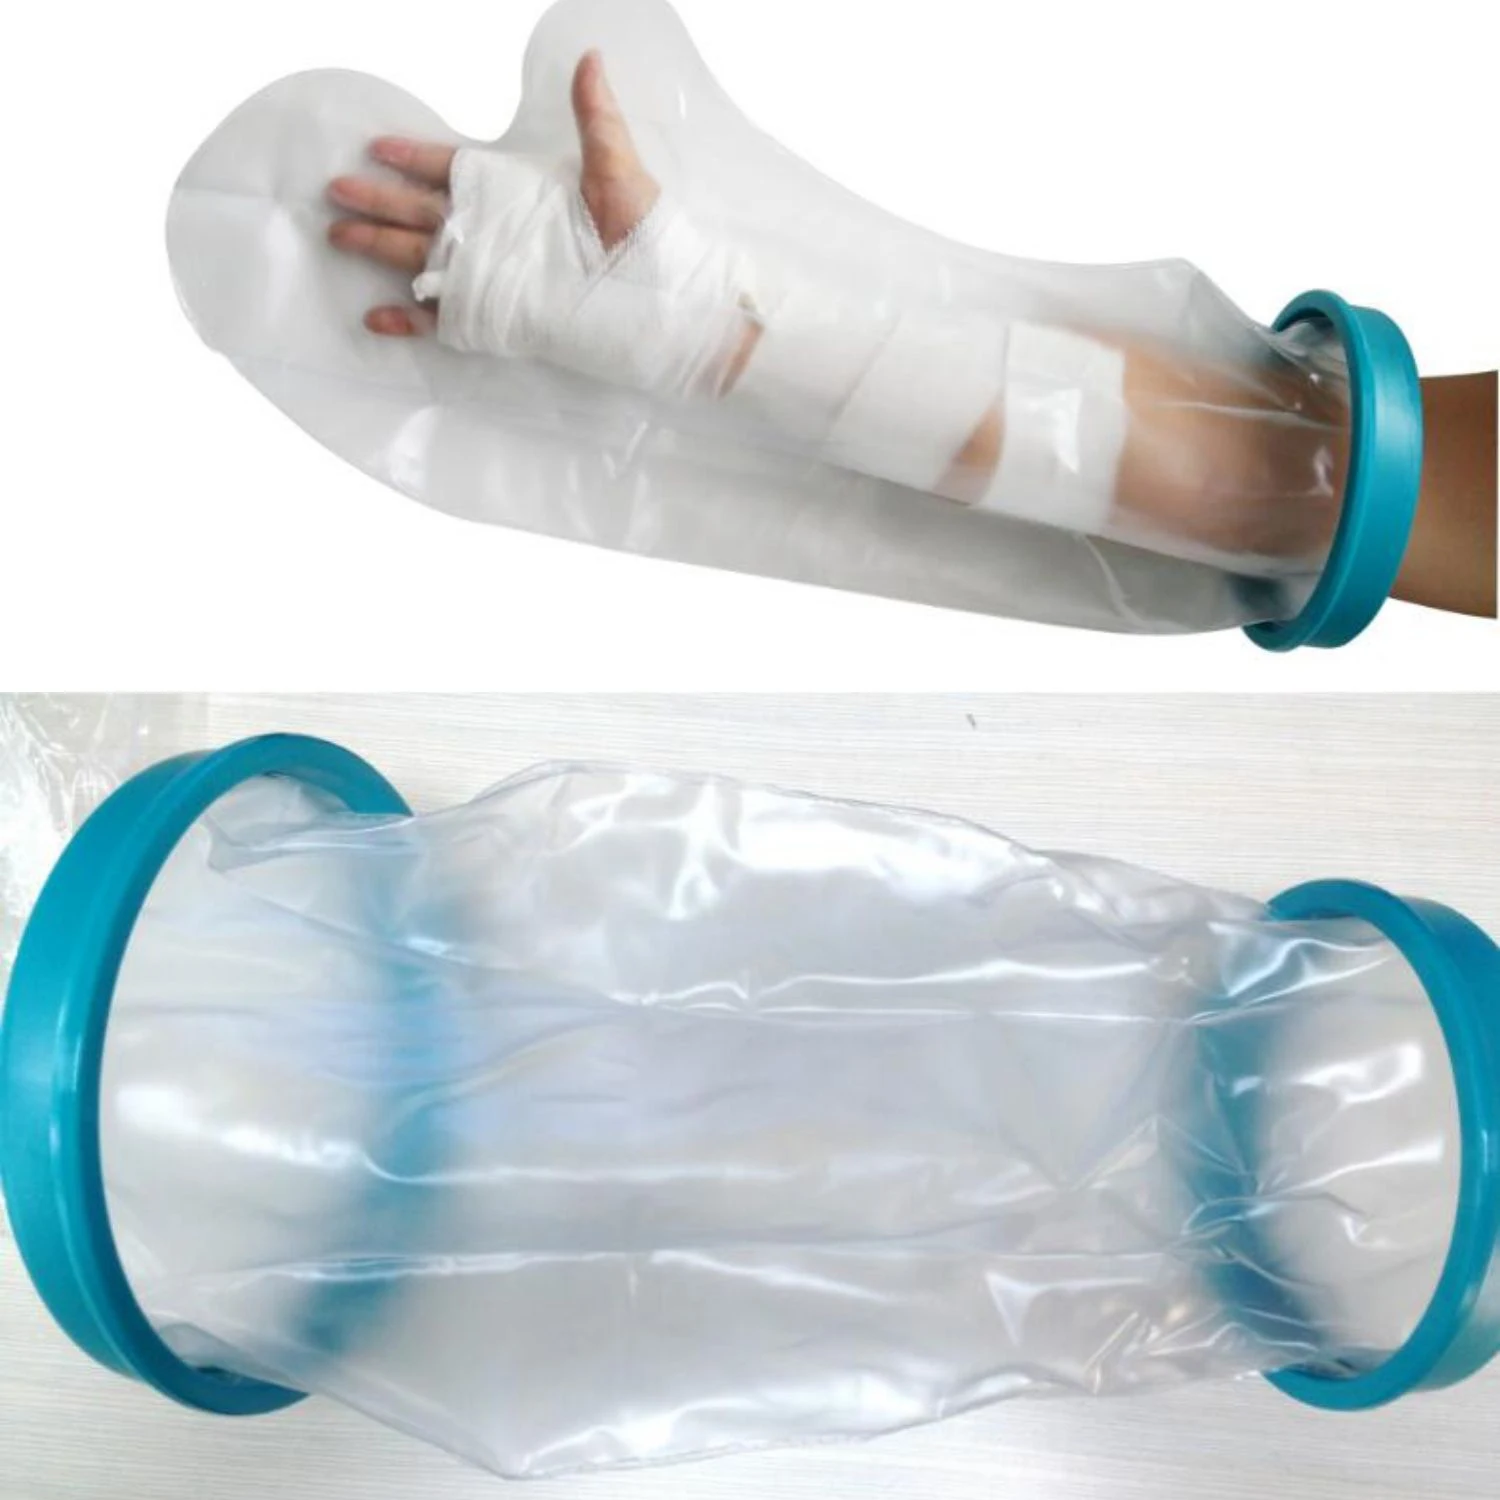 Waterproof Seal Cast Bandage Protector Cover Plastic Dry Bag Water Tight  Seal Bandage Protector|Braces  Supports| - AliExpress